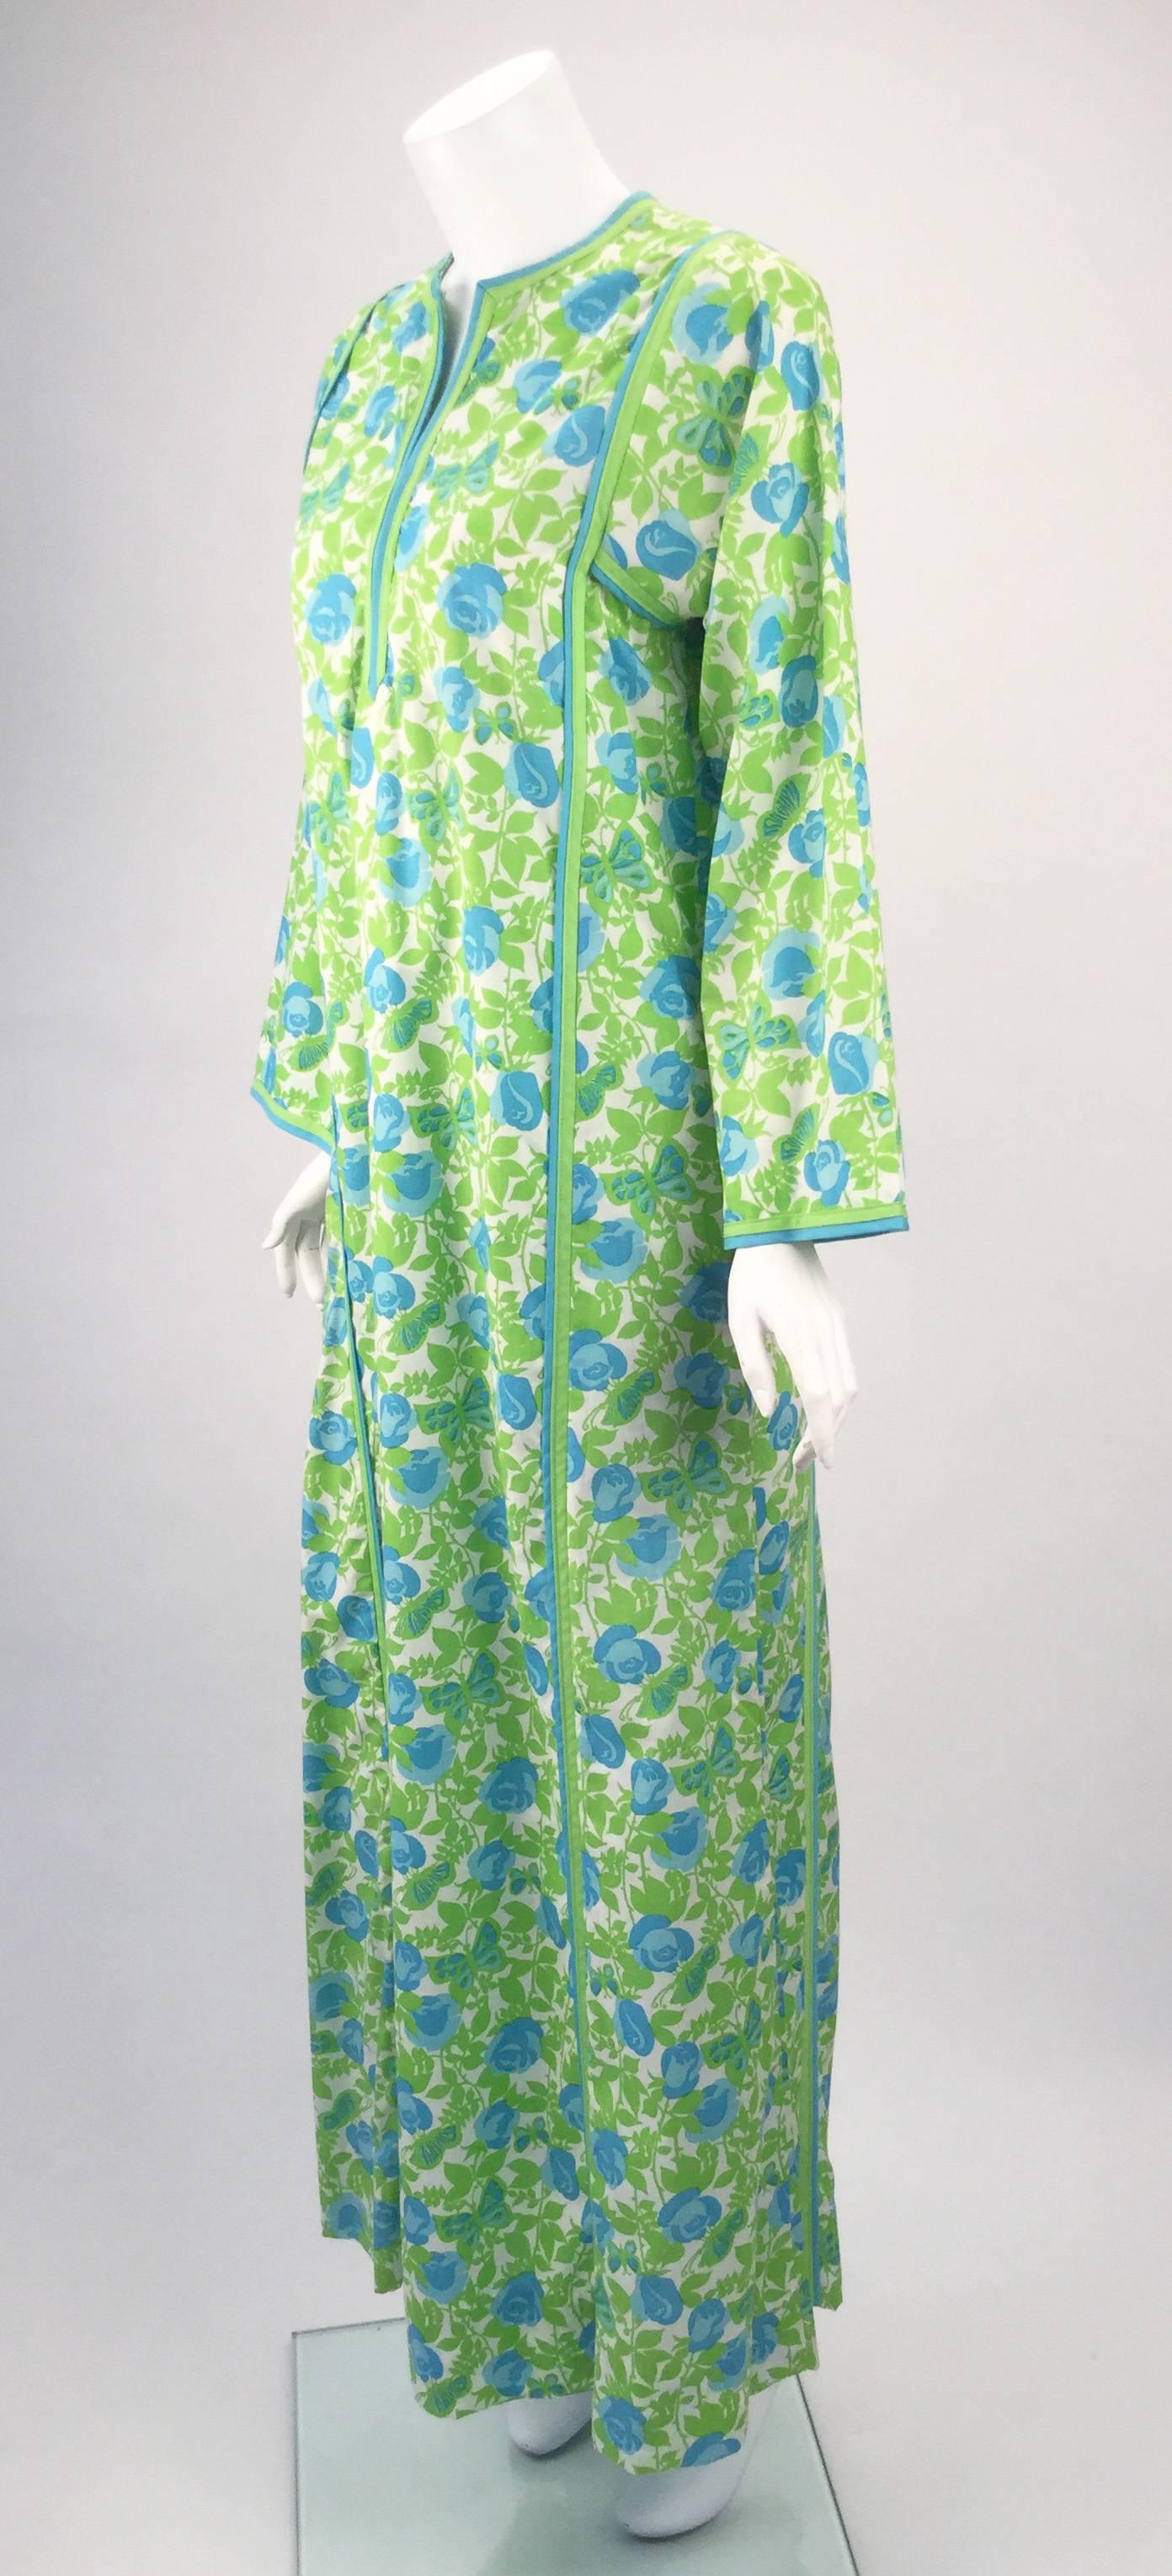 Fun, fun, fun... late 1960s/early 1970s multi green and blue floral and butterfly print, long sleeve caftan by Lilly Pulitzer. This cotton caftan has a deep slot neckline, which fastens by a single hook and eye halfway down the slot. Seam binding